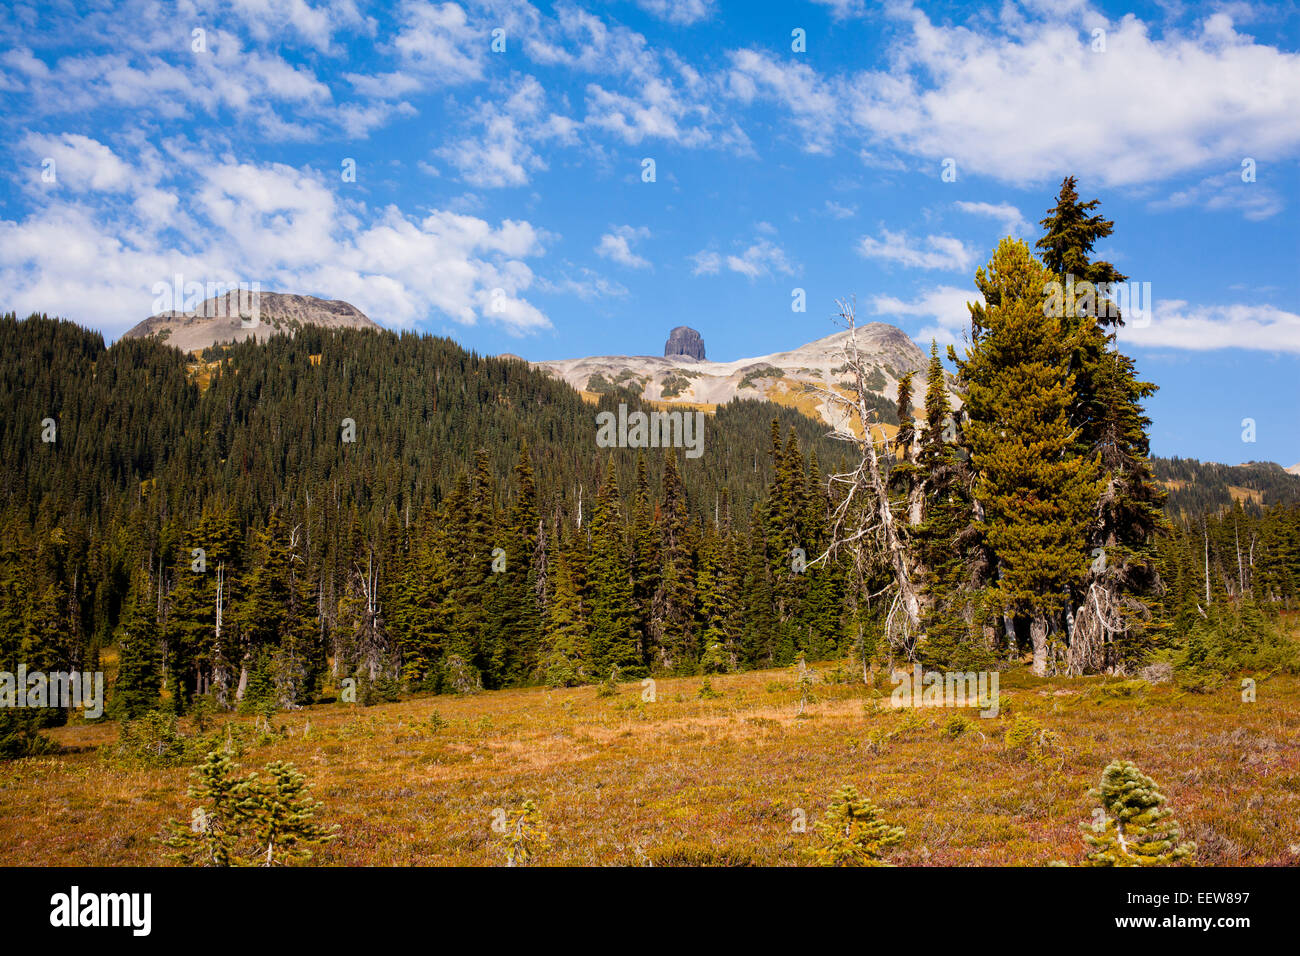 Boreal forest and Black Tusk in the distance, Garibaldi Provincial Park, BC, Canada Stock Photo